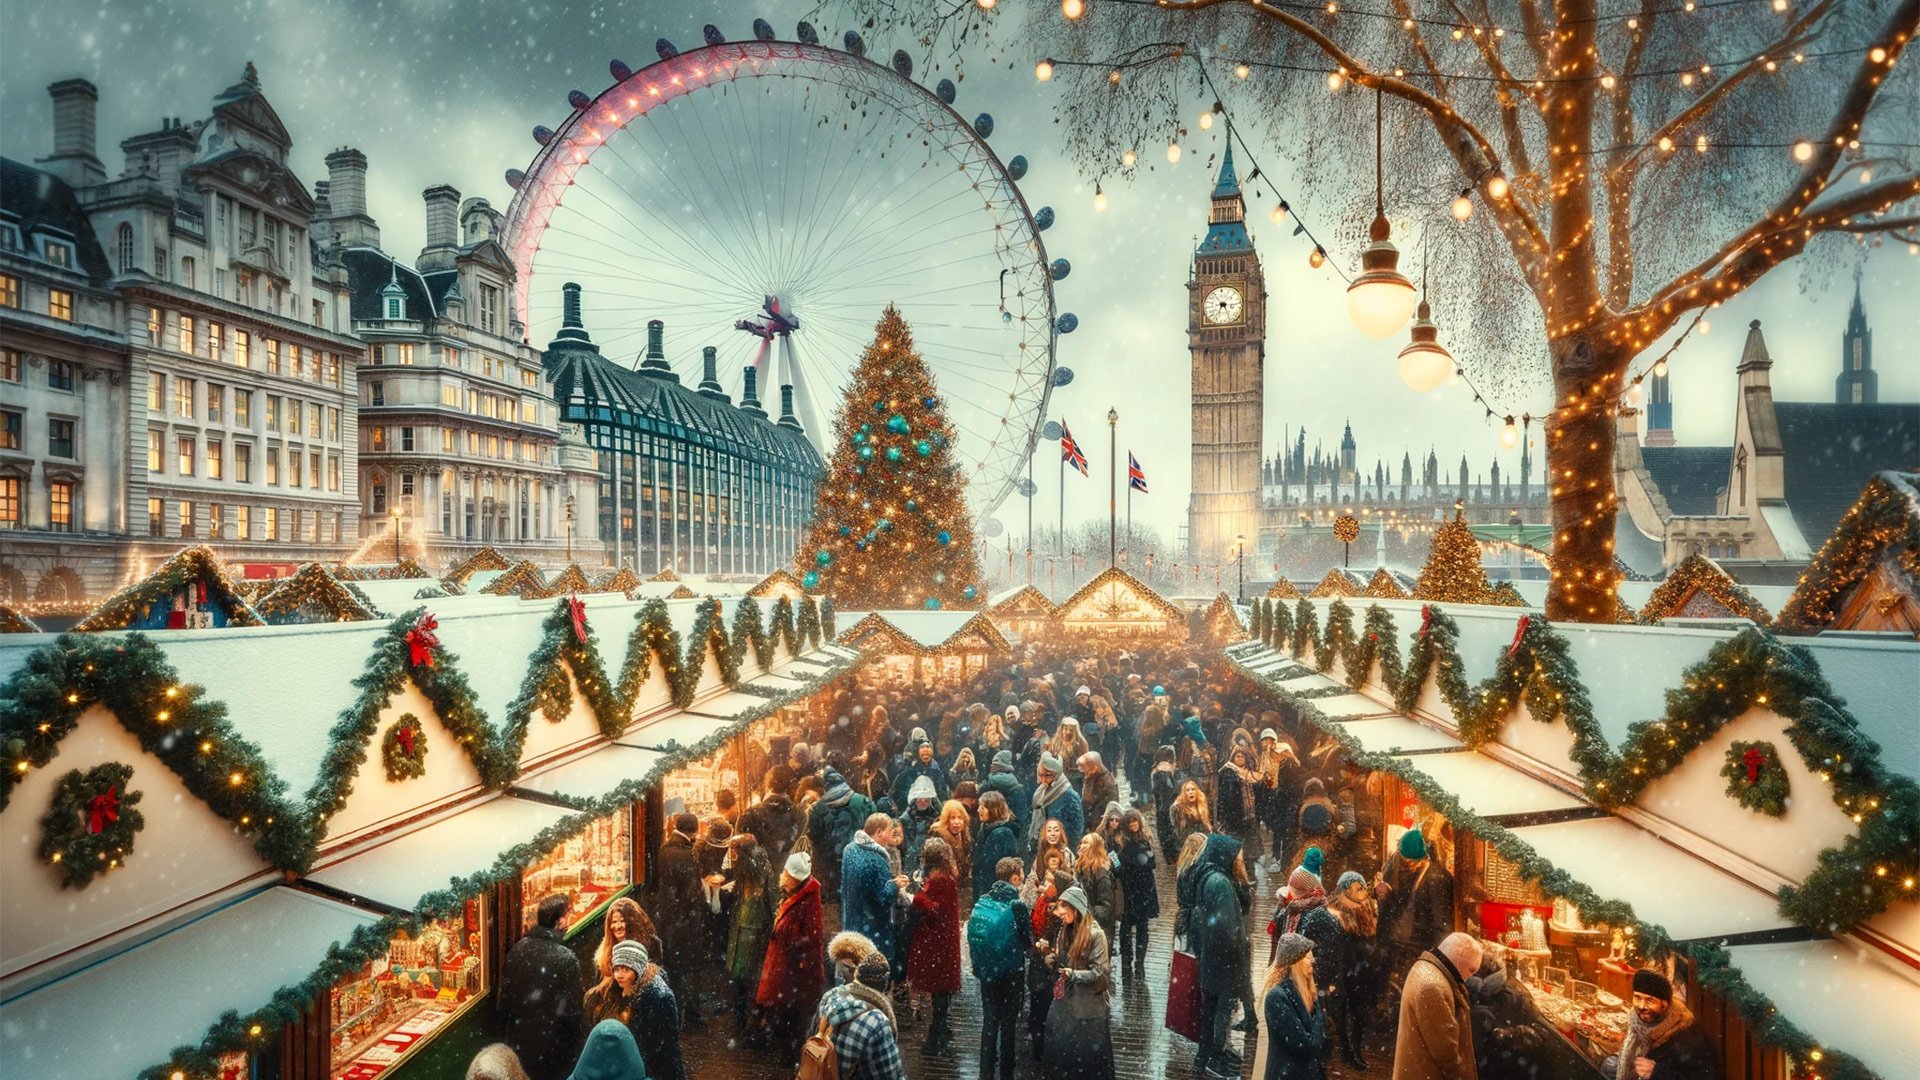 SAVE 20% ON WINTER STAYS IN LONDON!